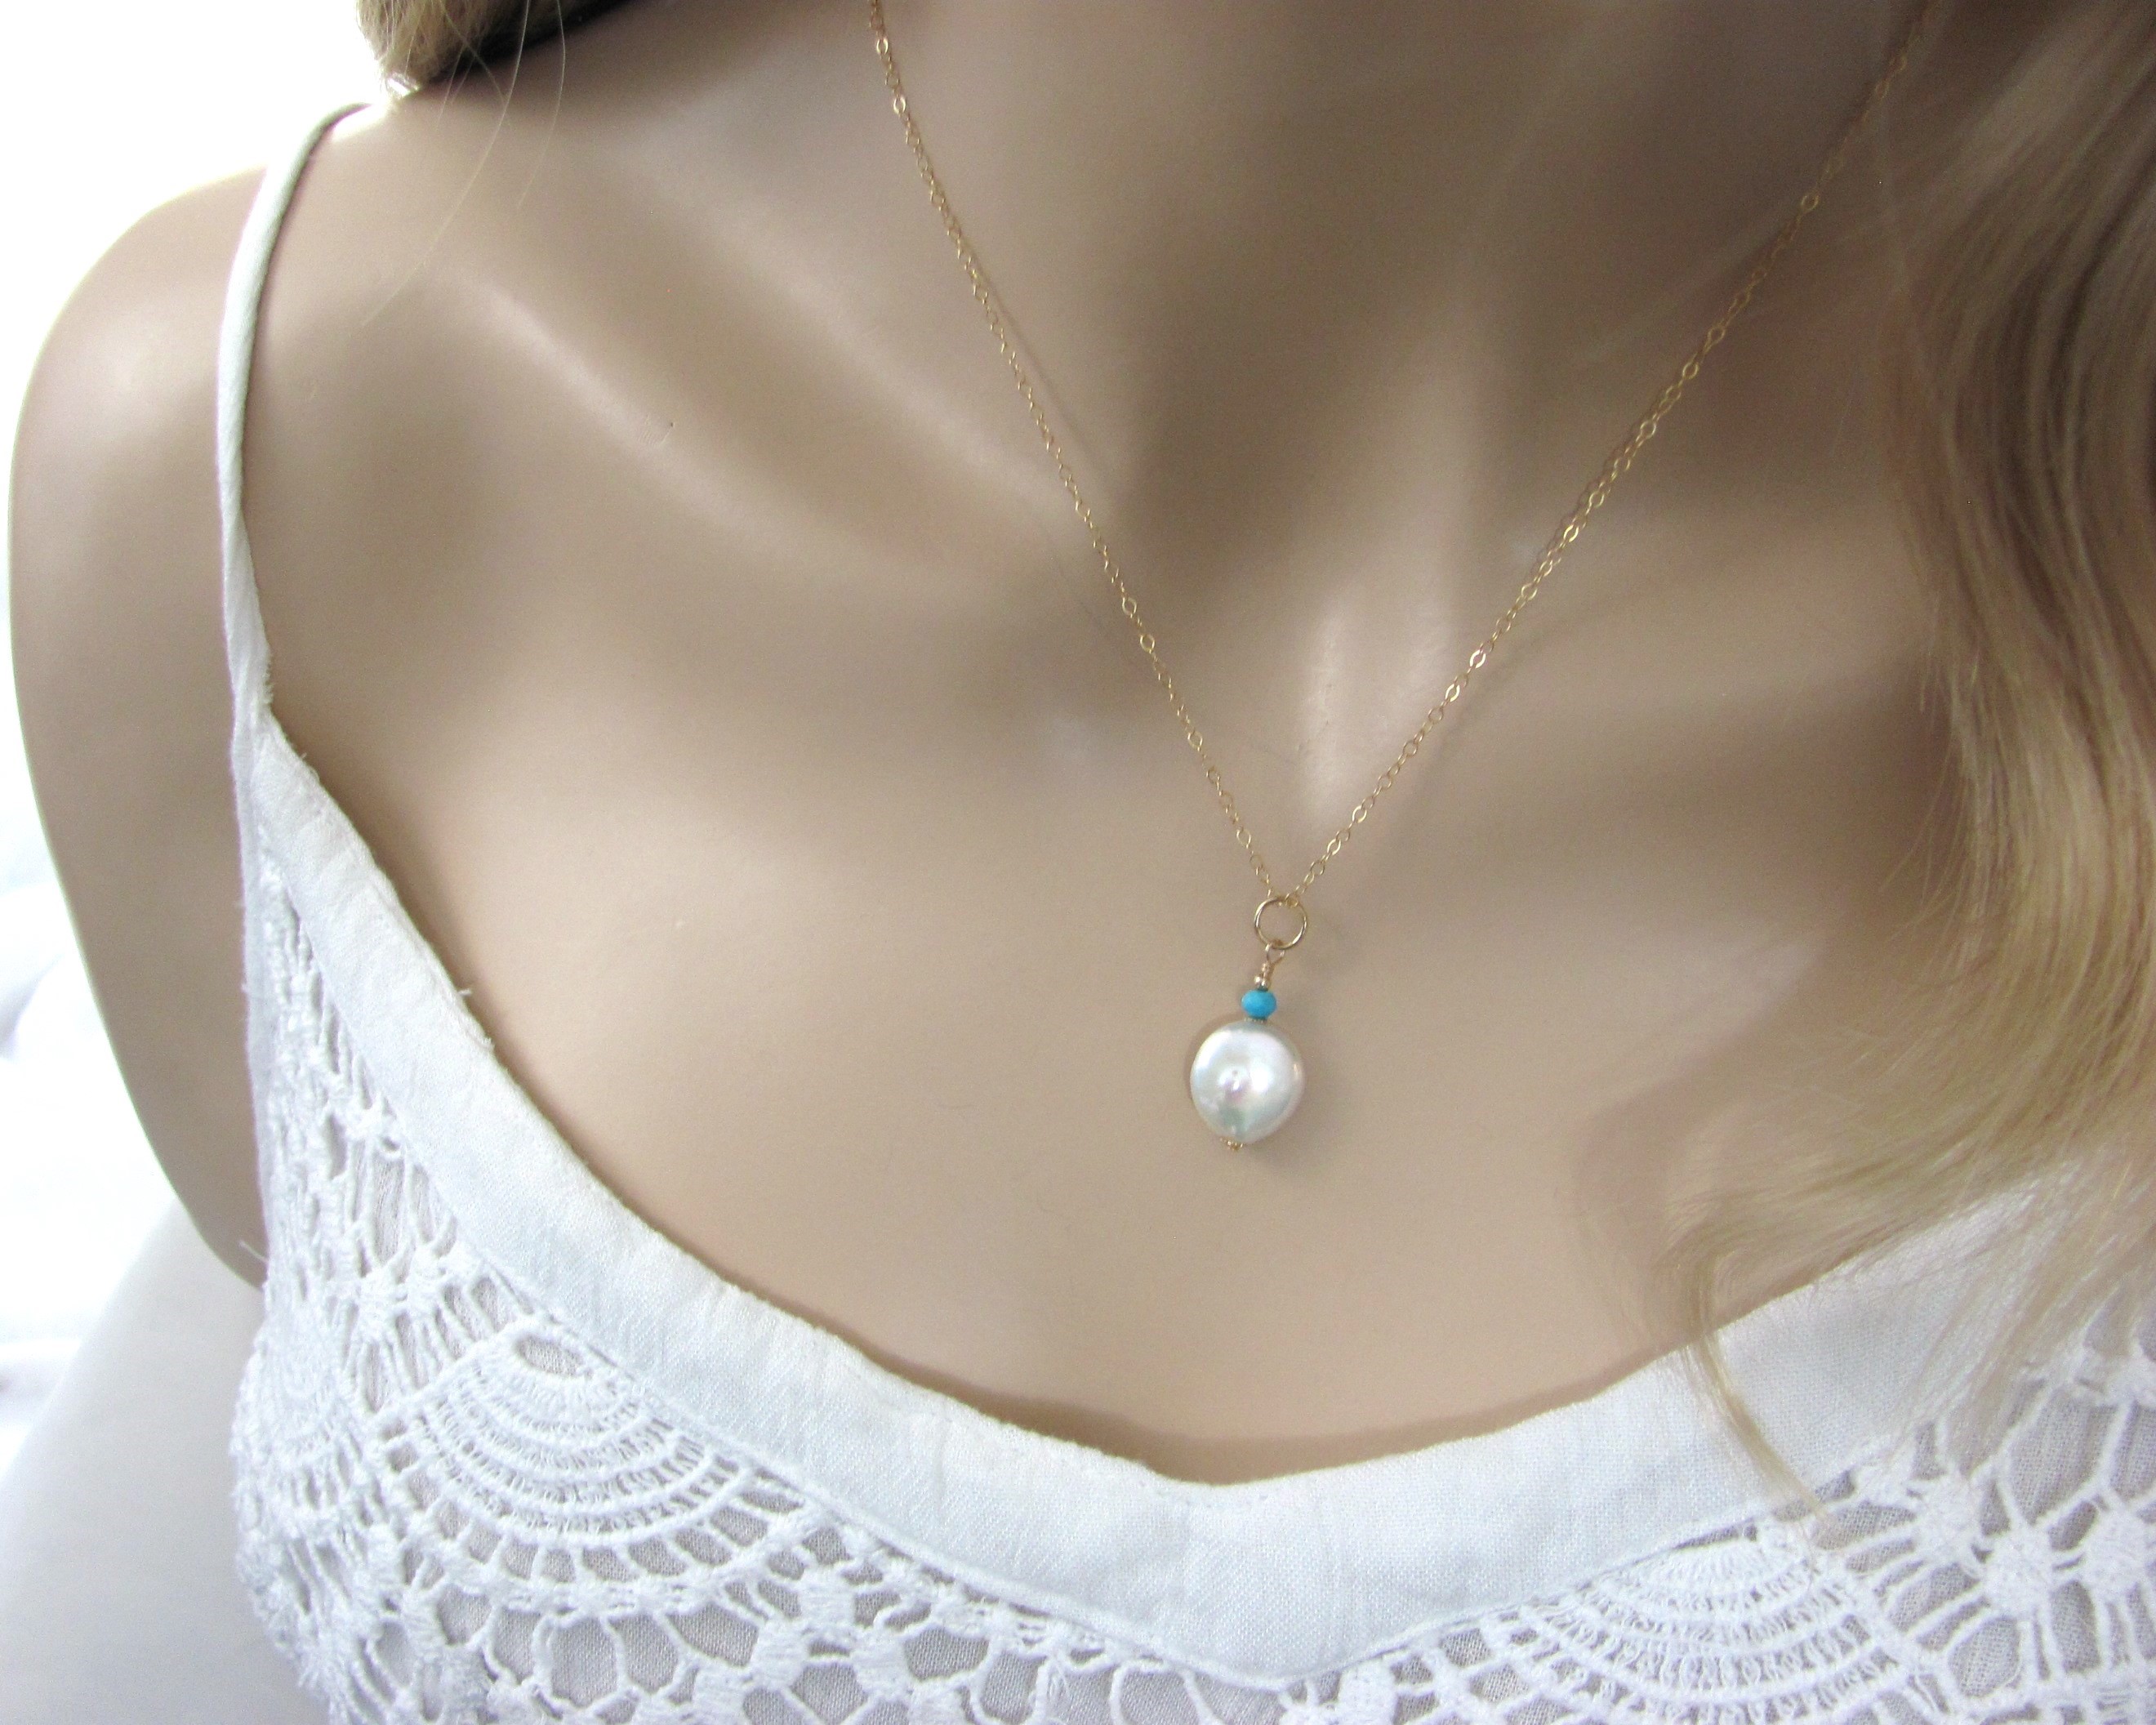 Personalized Pearl Necklace with Birthstones 14K Gold Filled